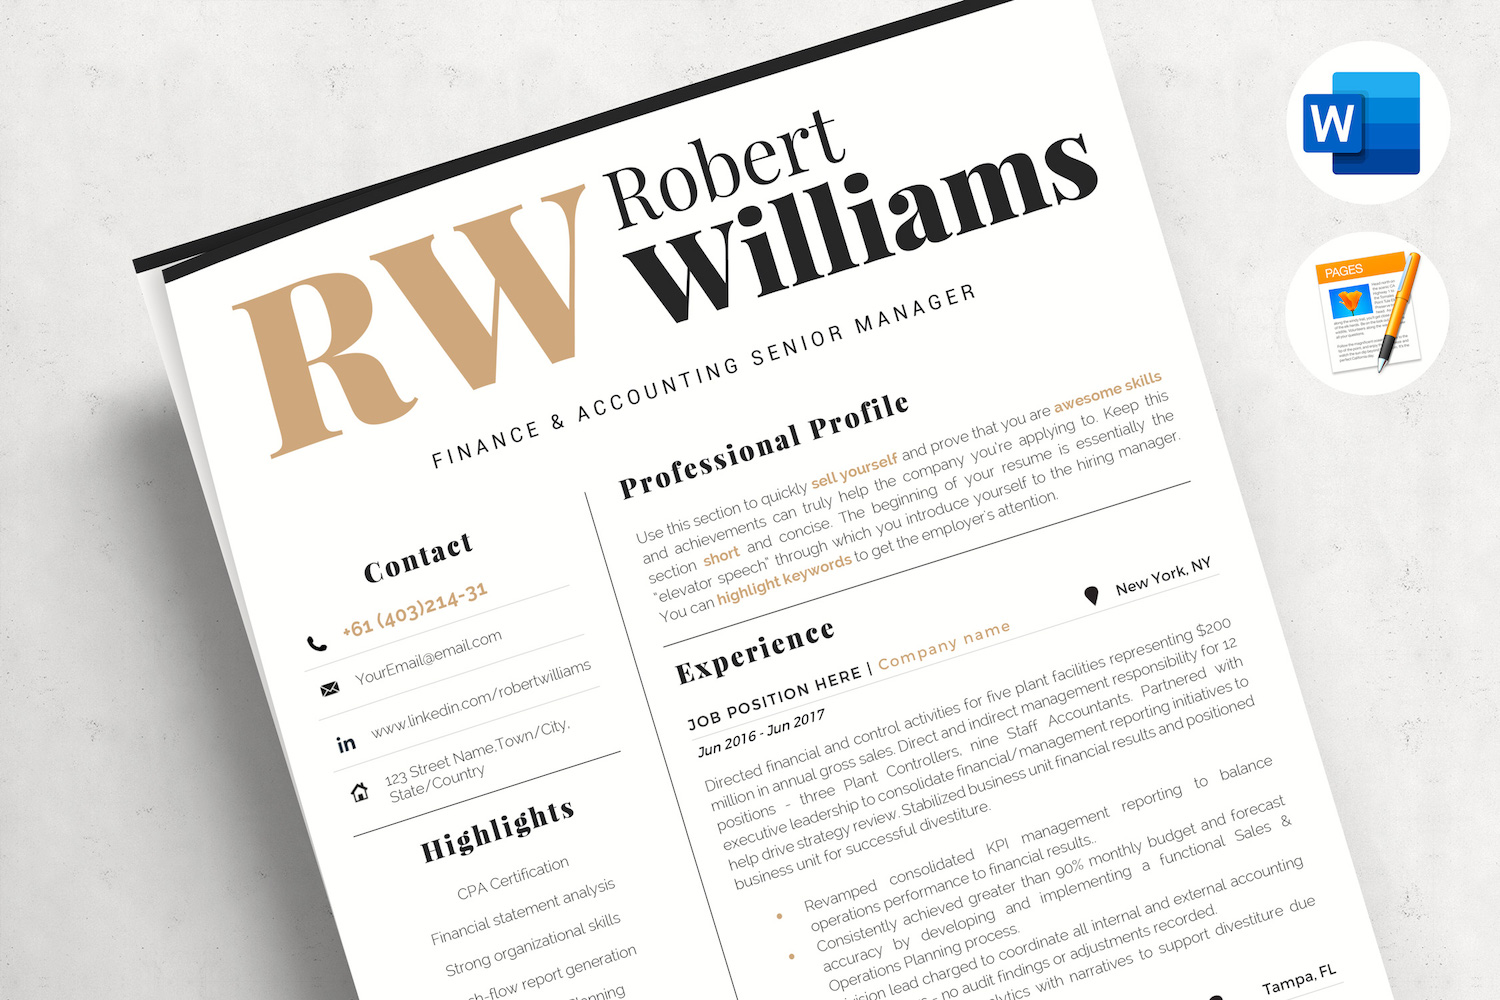 ROBERT - Accountant Sales Resume Format with Cover Letter & References for MS Word and Mac Pages